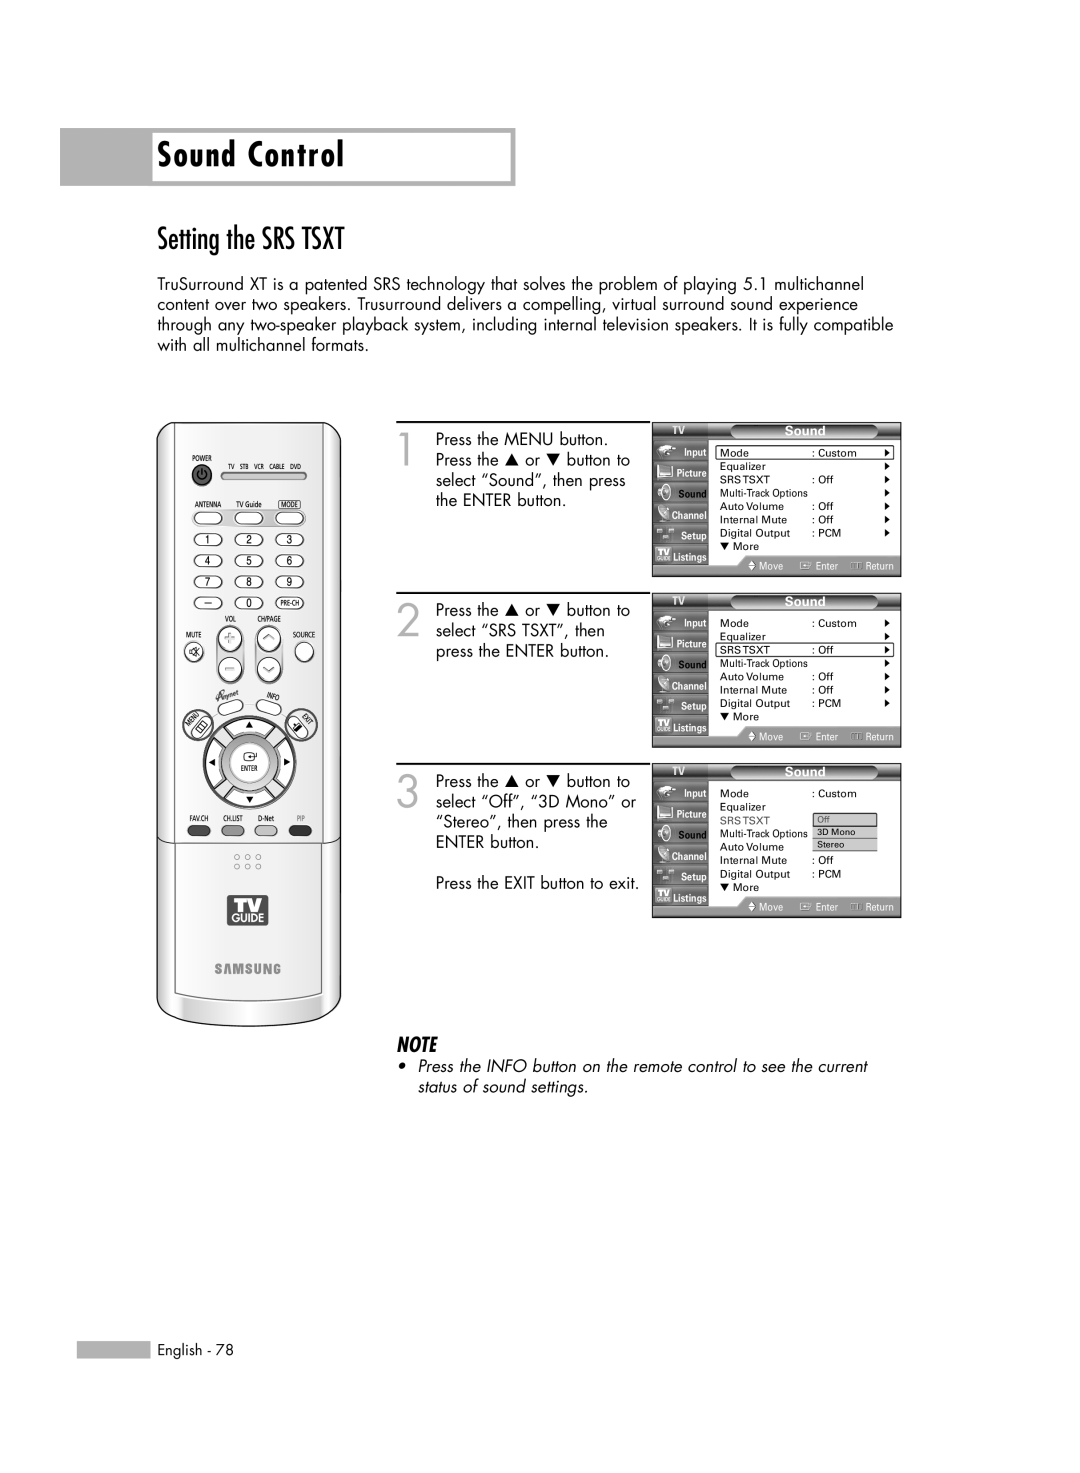 Samsung HL-R5688W manual Setting the SRS TSXT, Sound Control, Srs Tsxt 